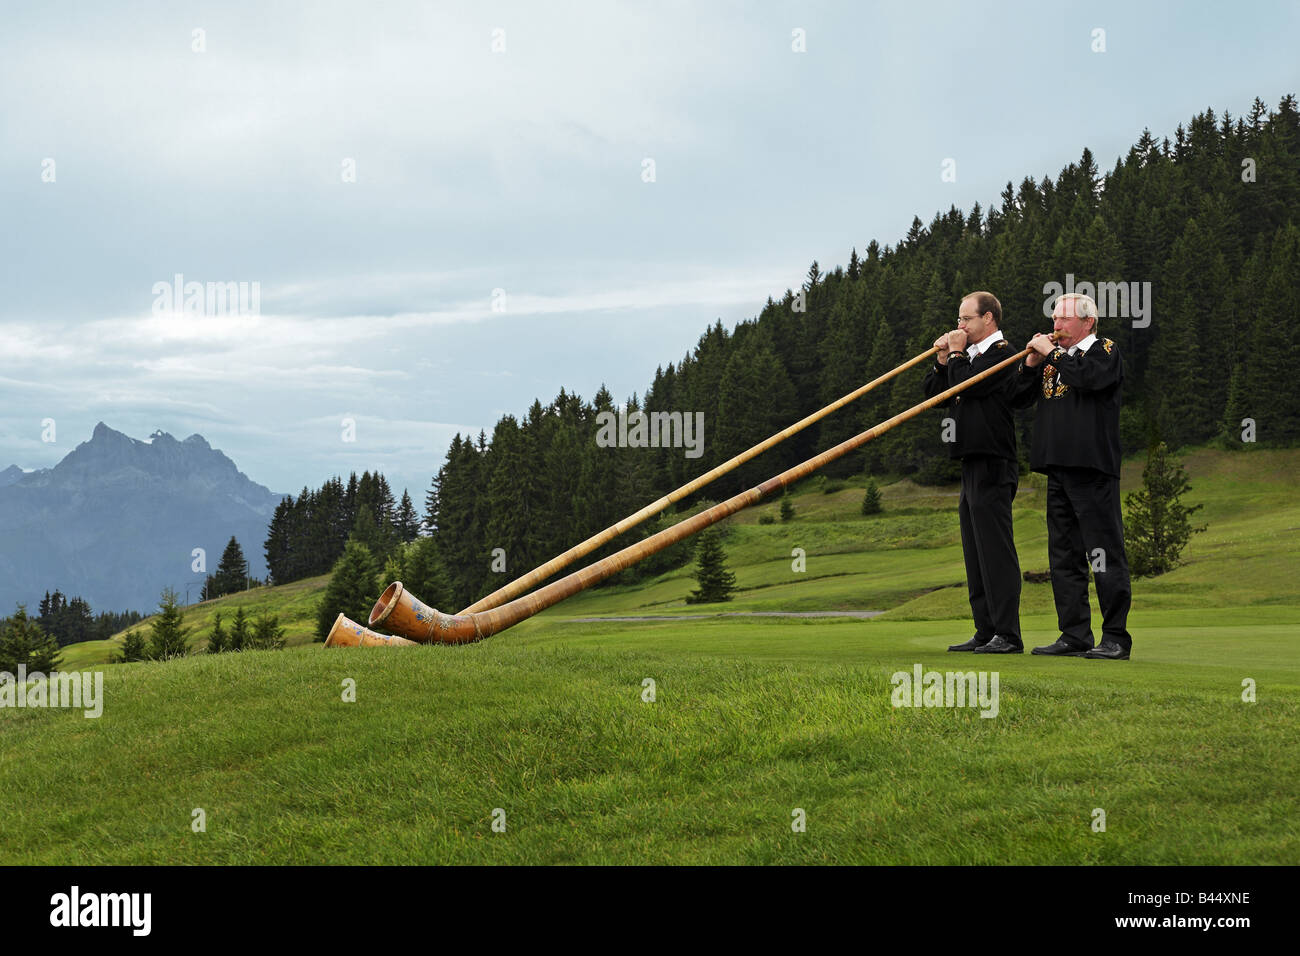 Alpine horn players in the mountain Stock Photo